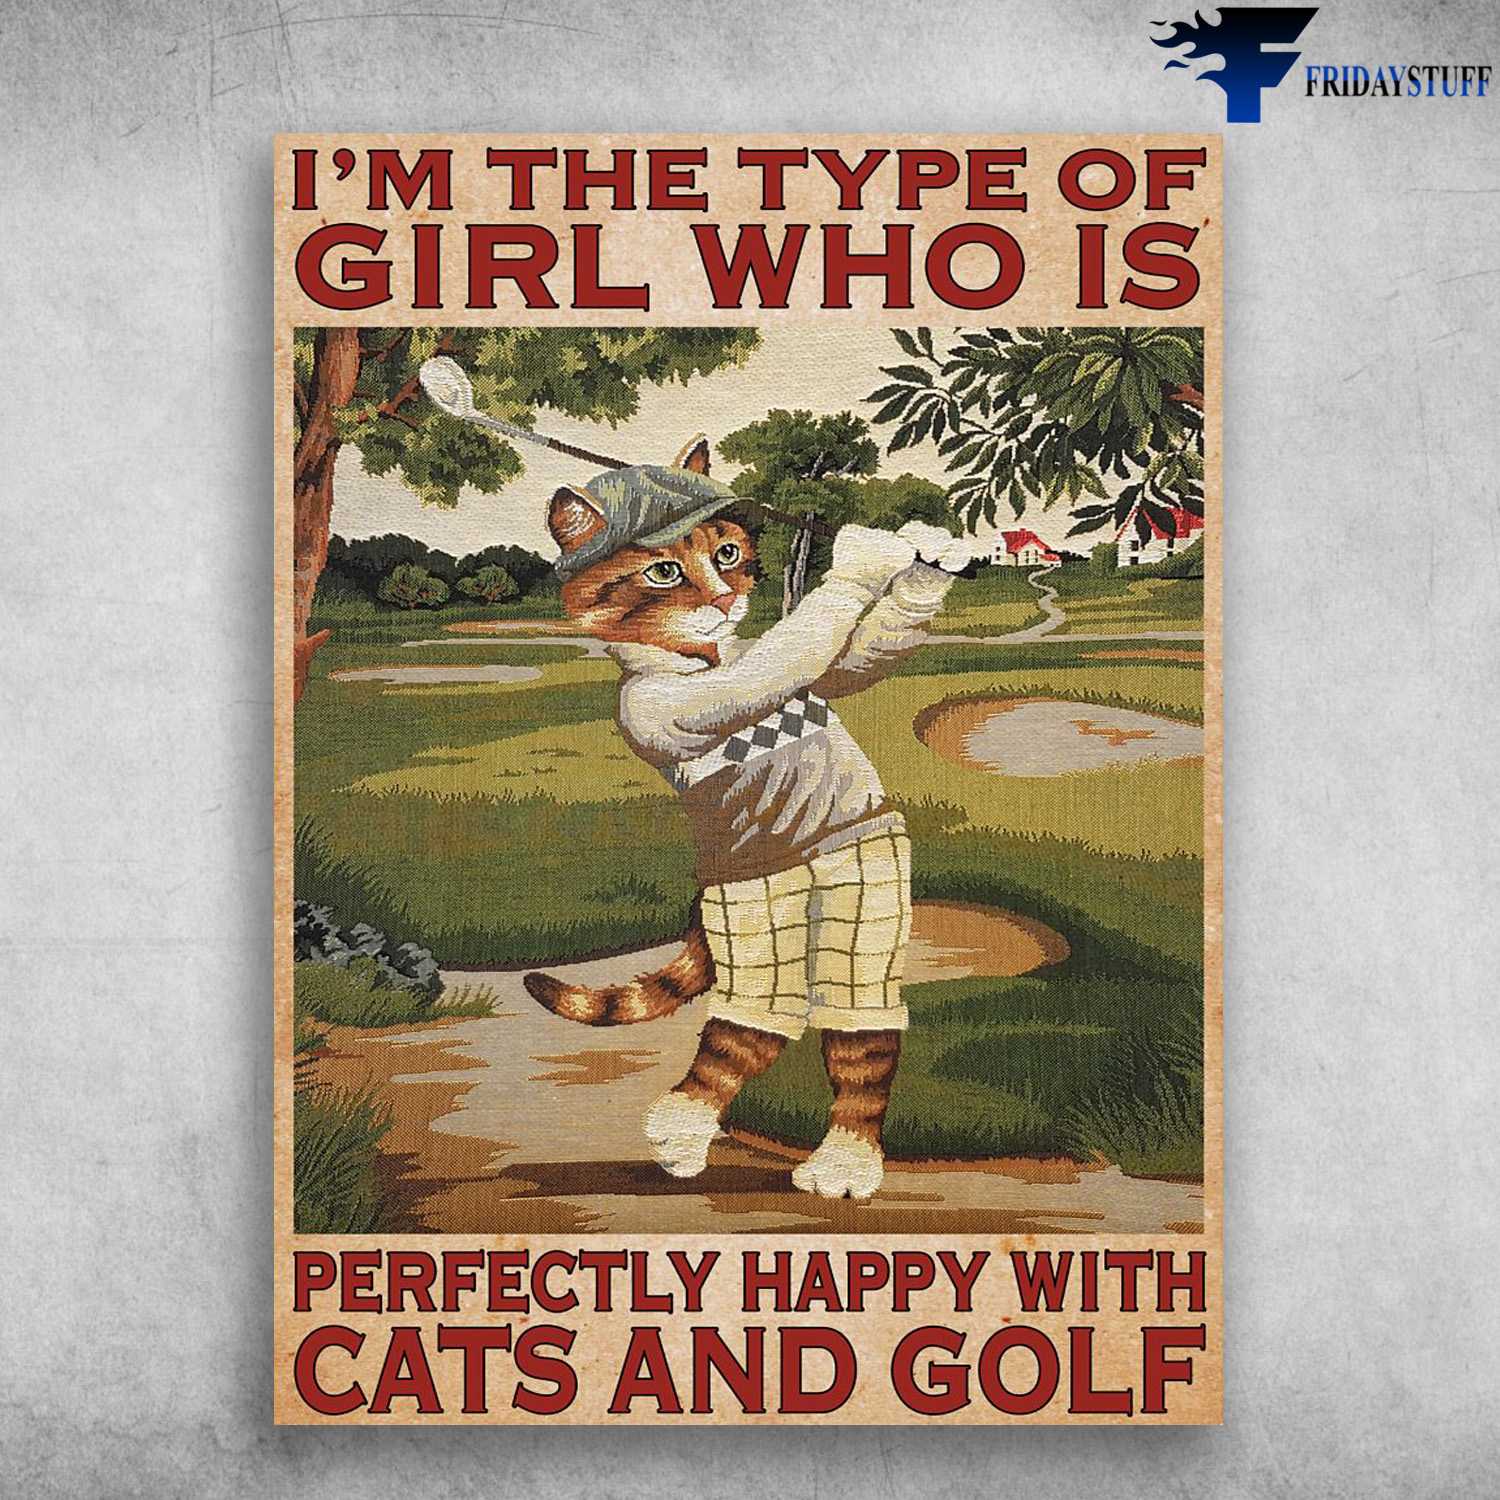 Golf Poster, Cat Plays Golf, I'm The Type Of Girl, Who Is Perfectly Happy With, Cats And Golf